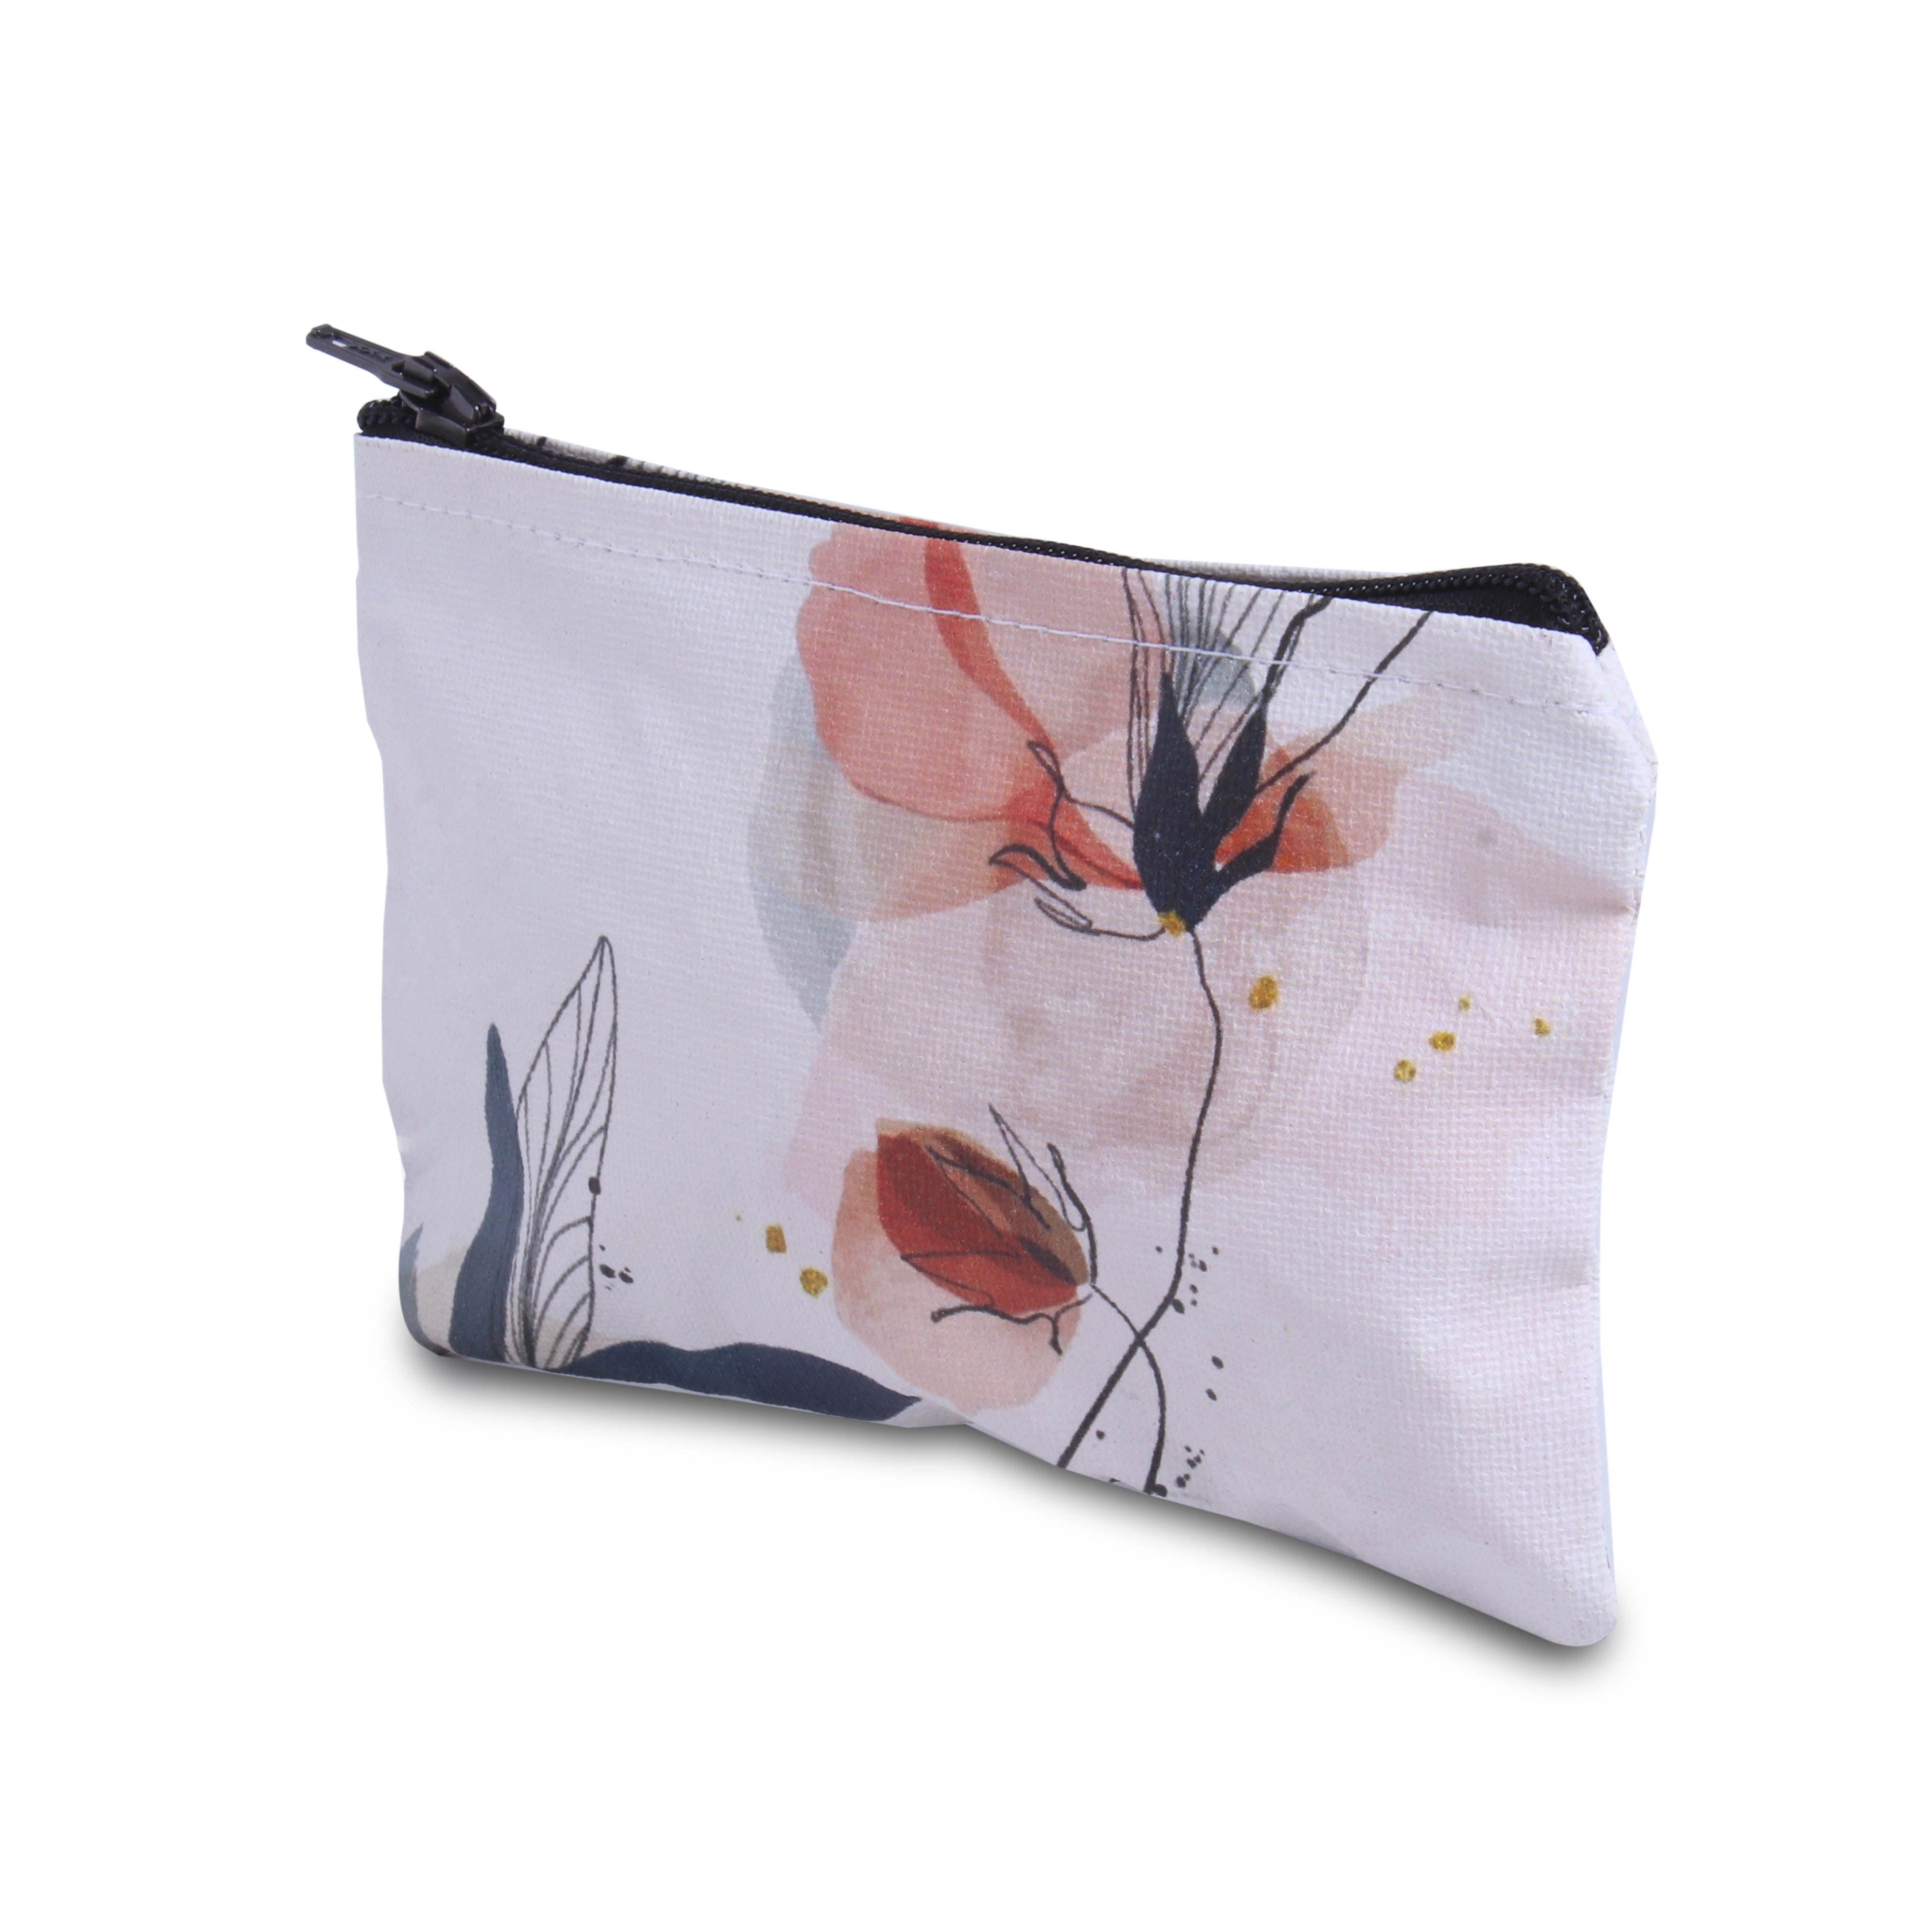 Canvas Printed Zip Pouch Floral Elegance 8.25 X 5.5inch Approx1 pc